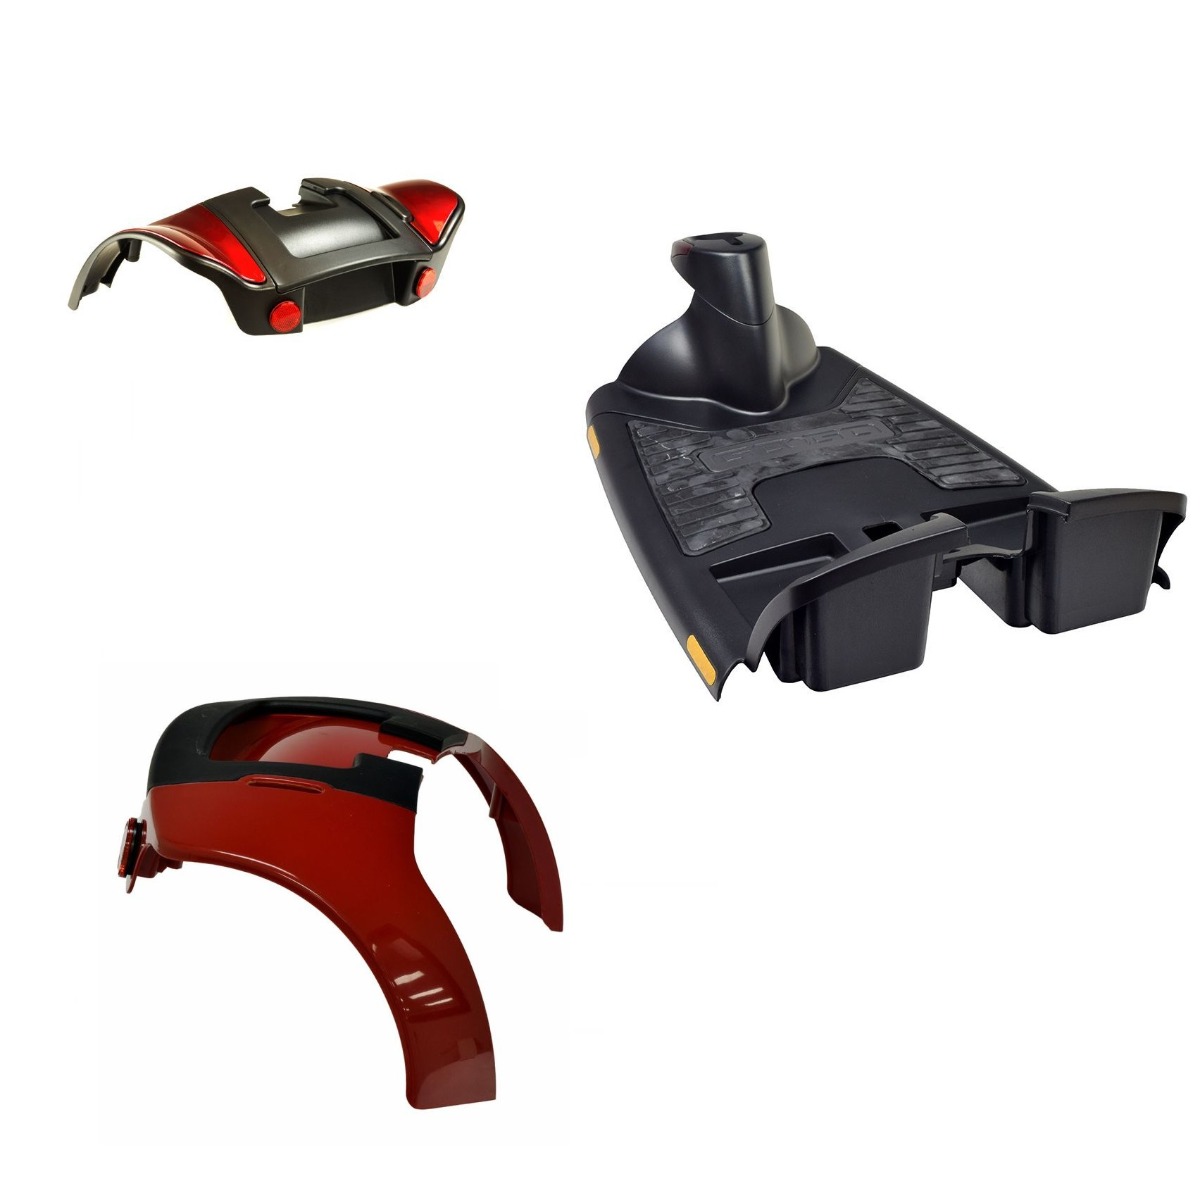 Mobility Scooter shroud kits and body panels